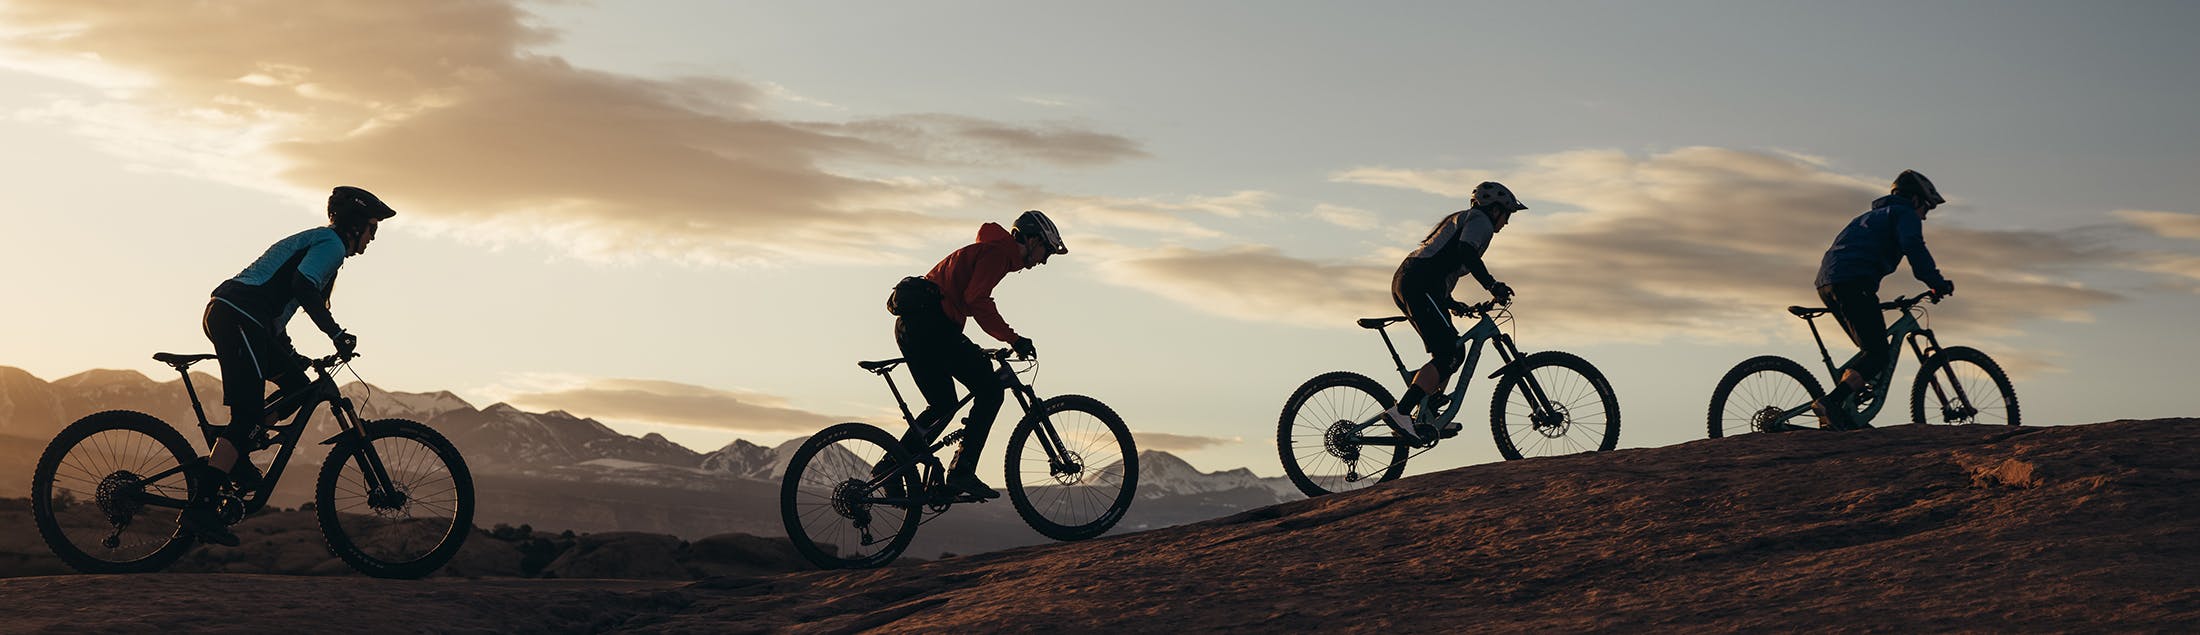 stories-mtb-in-moab-1